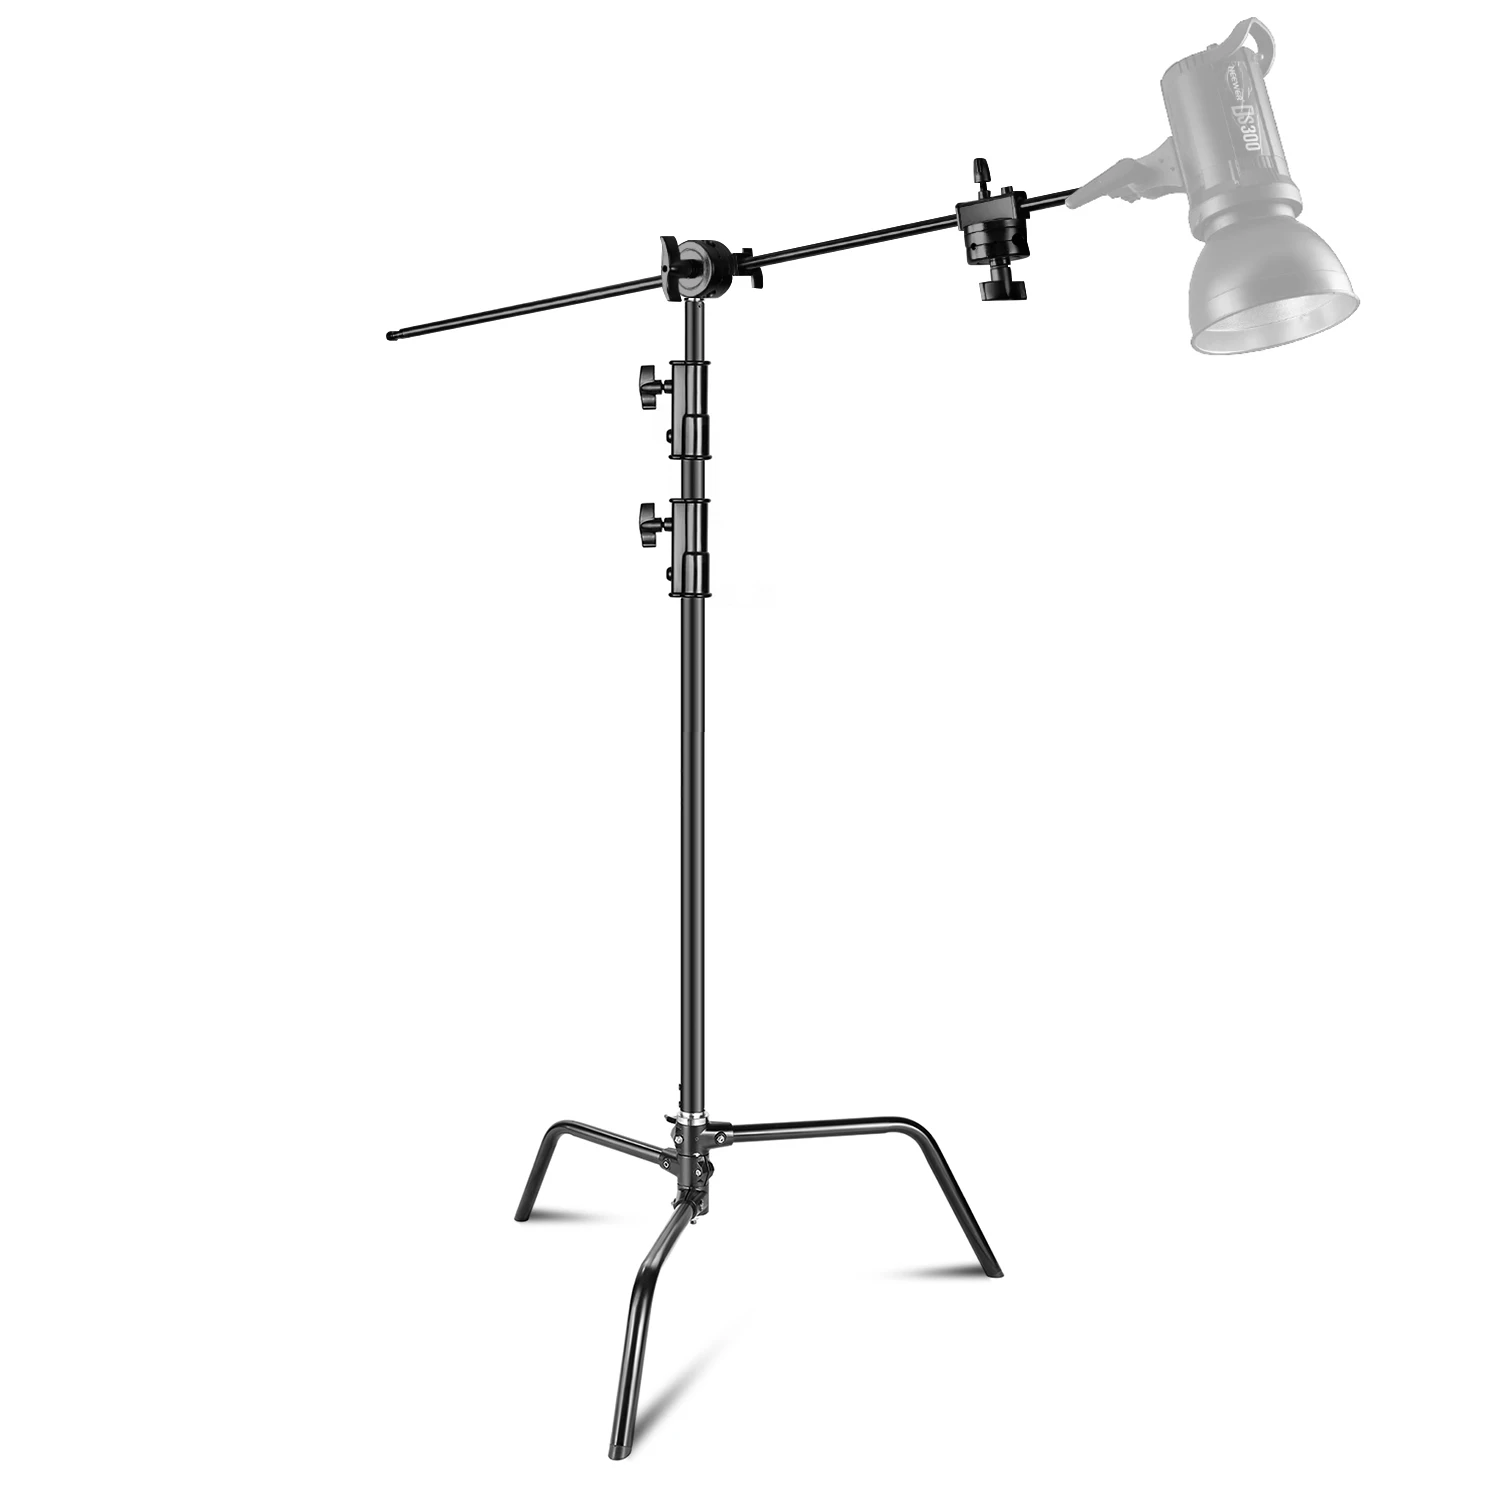 127cm Extension Grip Arm Boom Arm for Photo Studio Video Photography Tripod Reflector Monolight Pro Heavy Duty C Stand Boom Arm with 2x Grip Heads